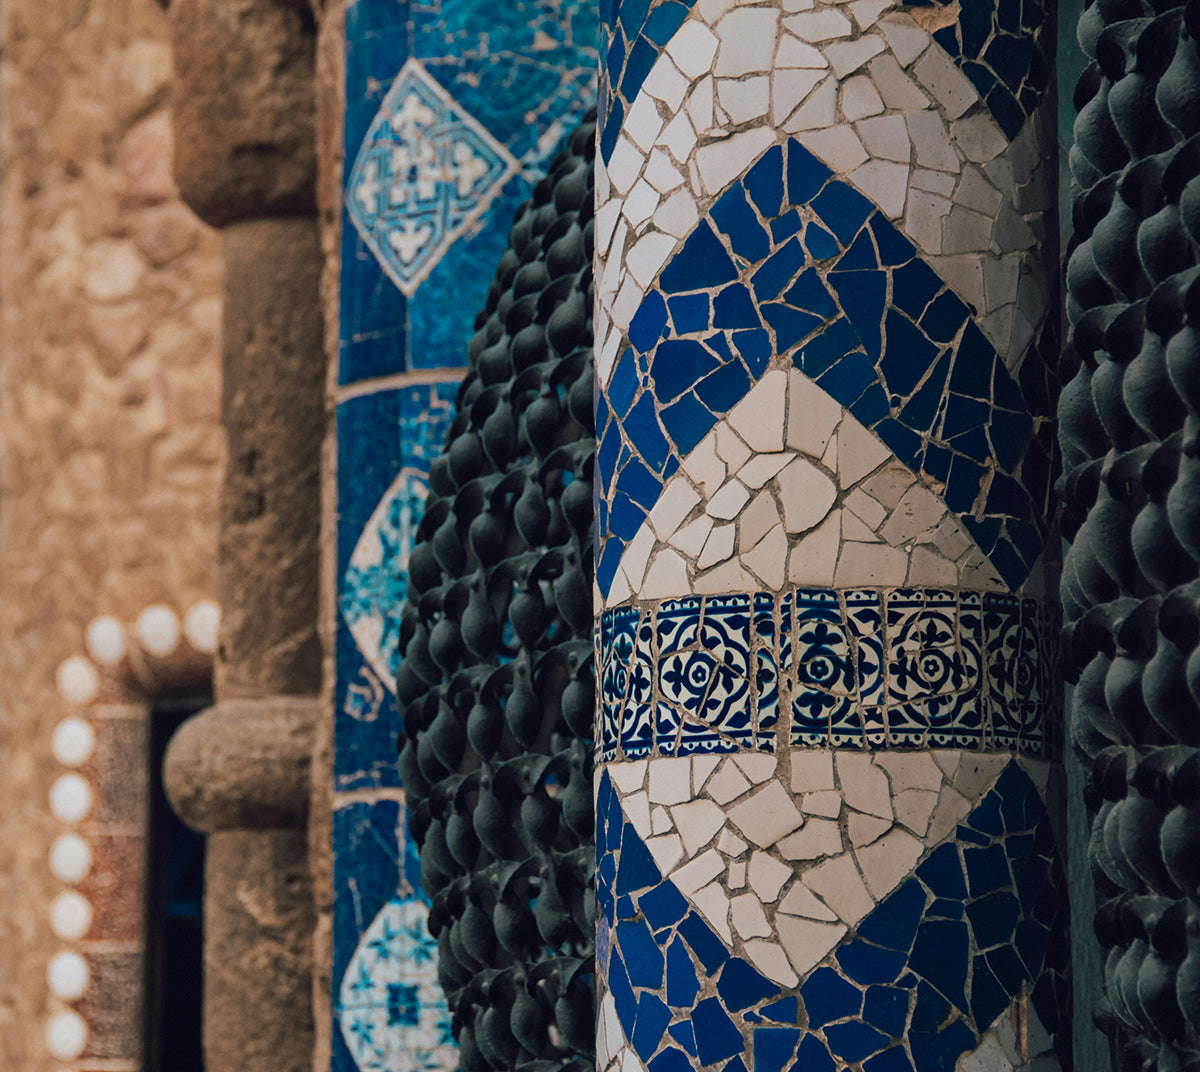 Closeup photo of blue and white mosaic tile at Park Guell by Antoni Gaudí.